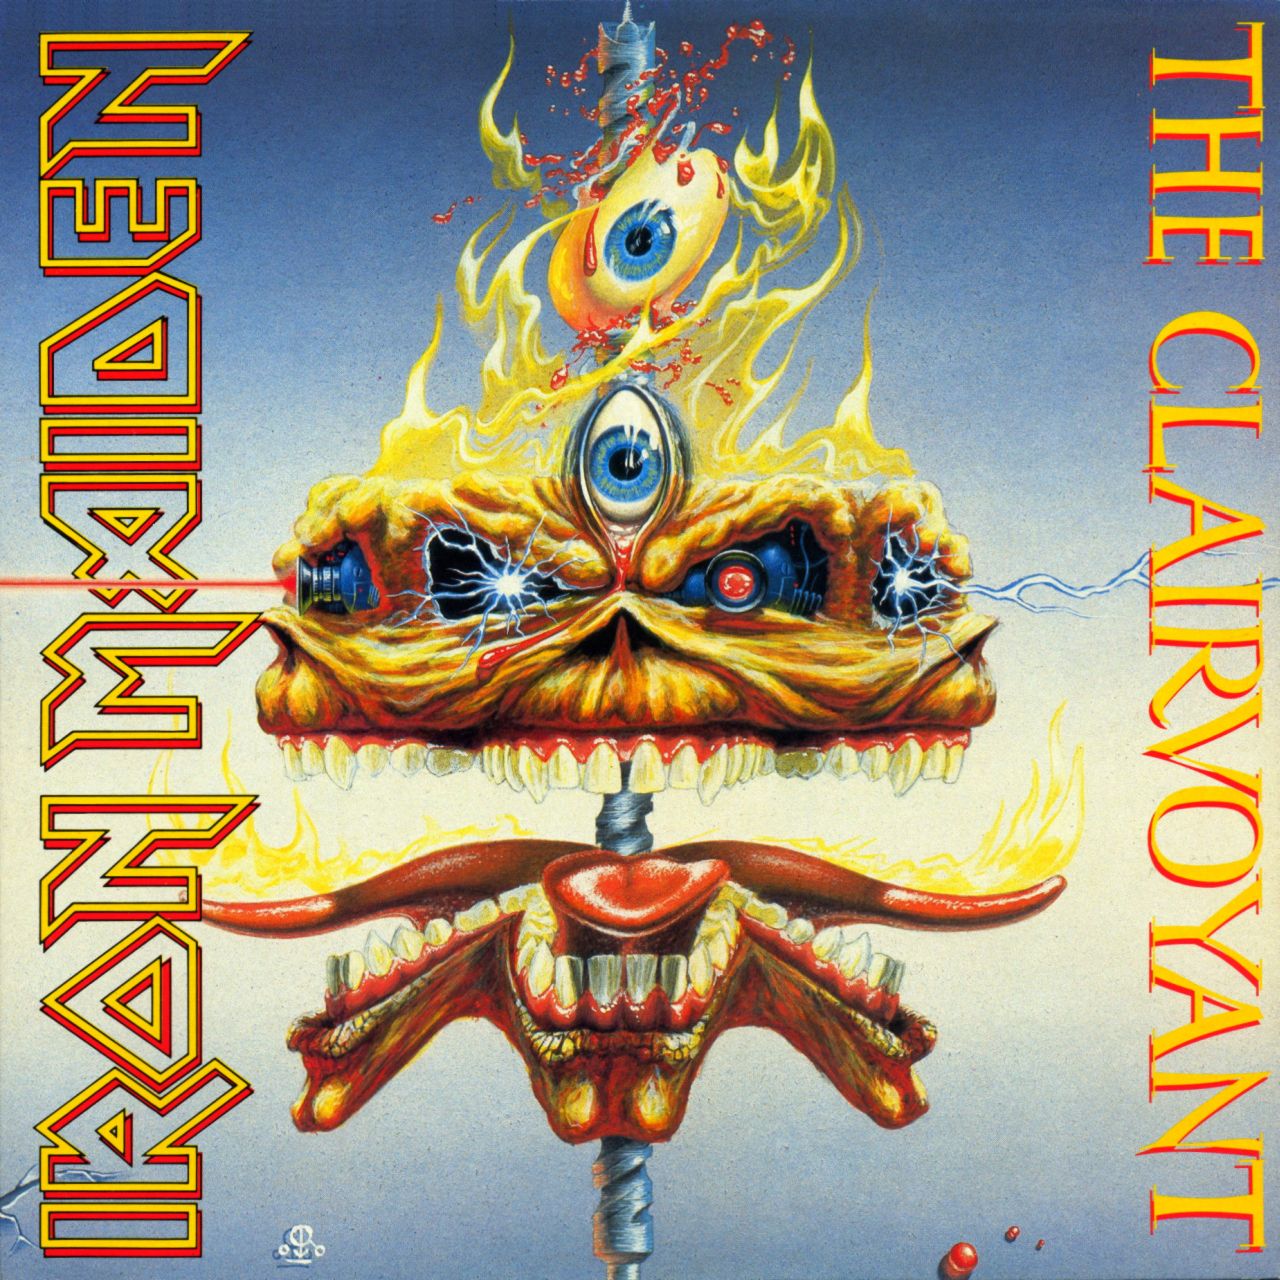 Iron Maiden — The Clairvoyant cover artwork